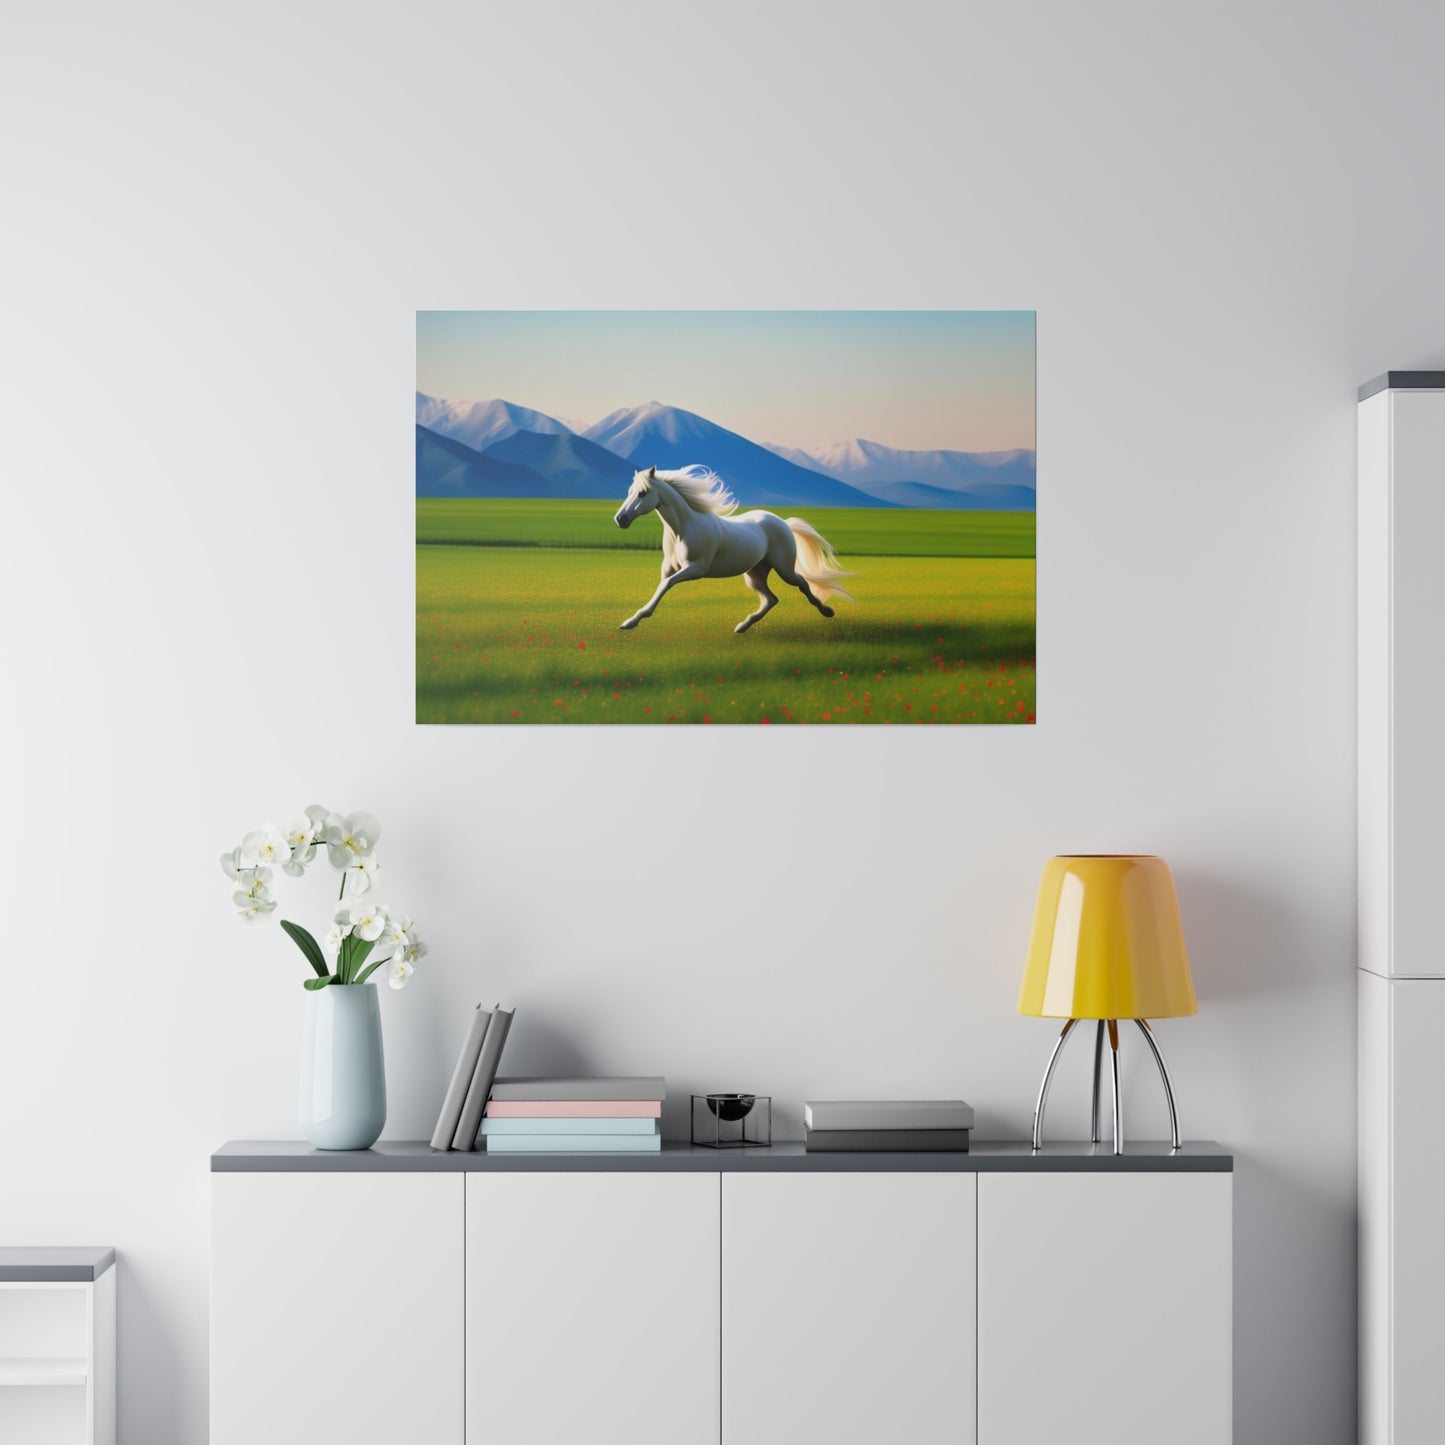 Wild Horses Series - Matte Canvas, Stretched, 0.75"